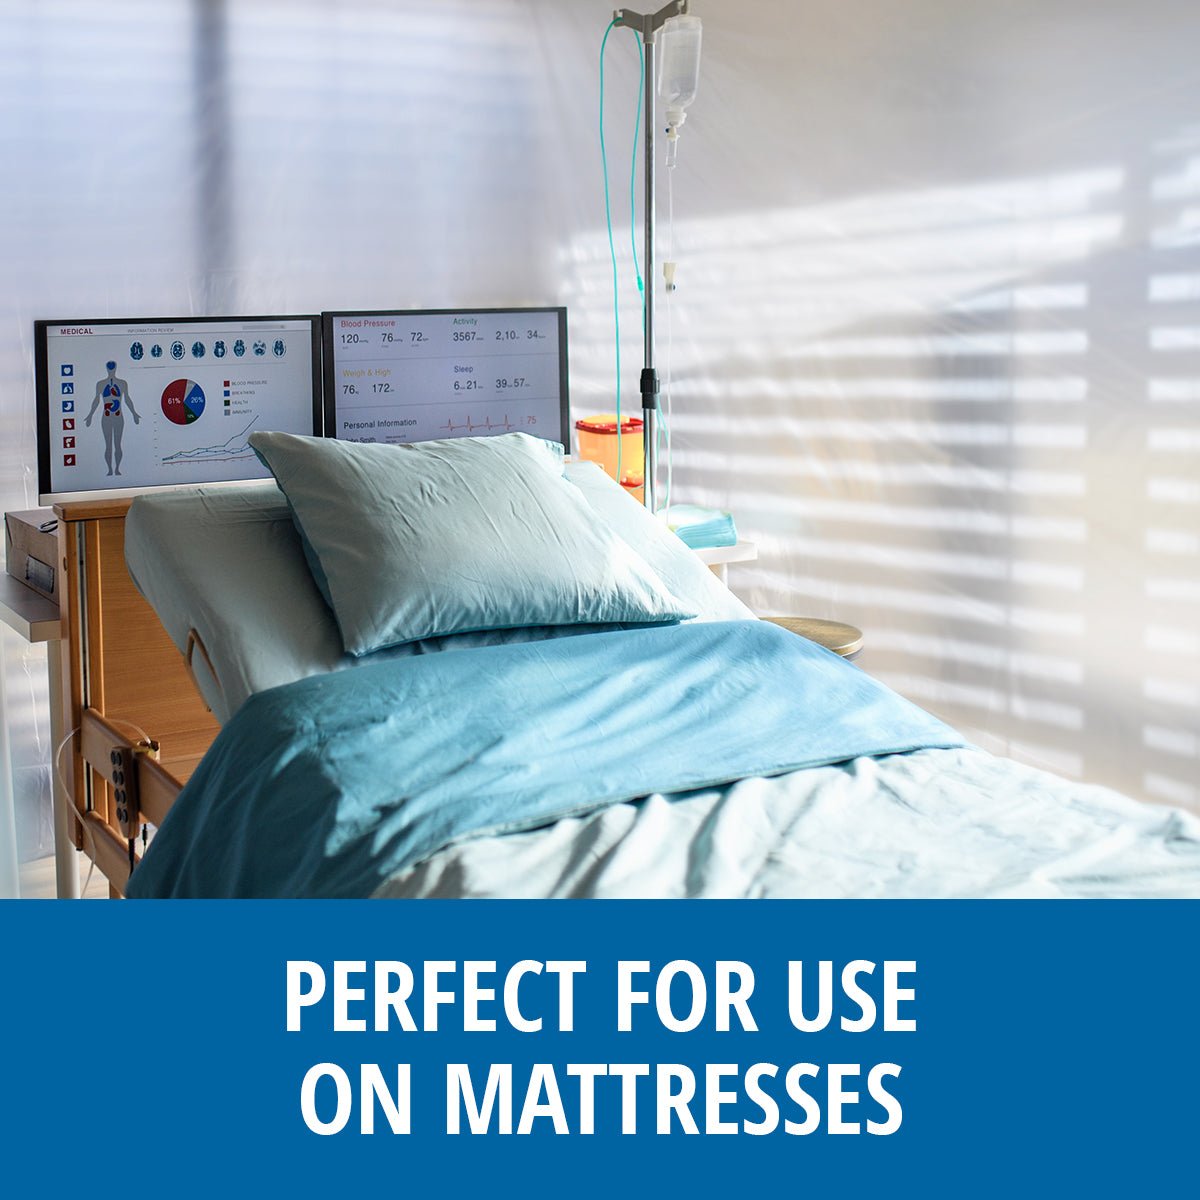 ProBio® Odor Out - Professional Strength is perfect for use on mattresses